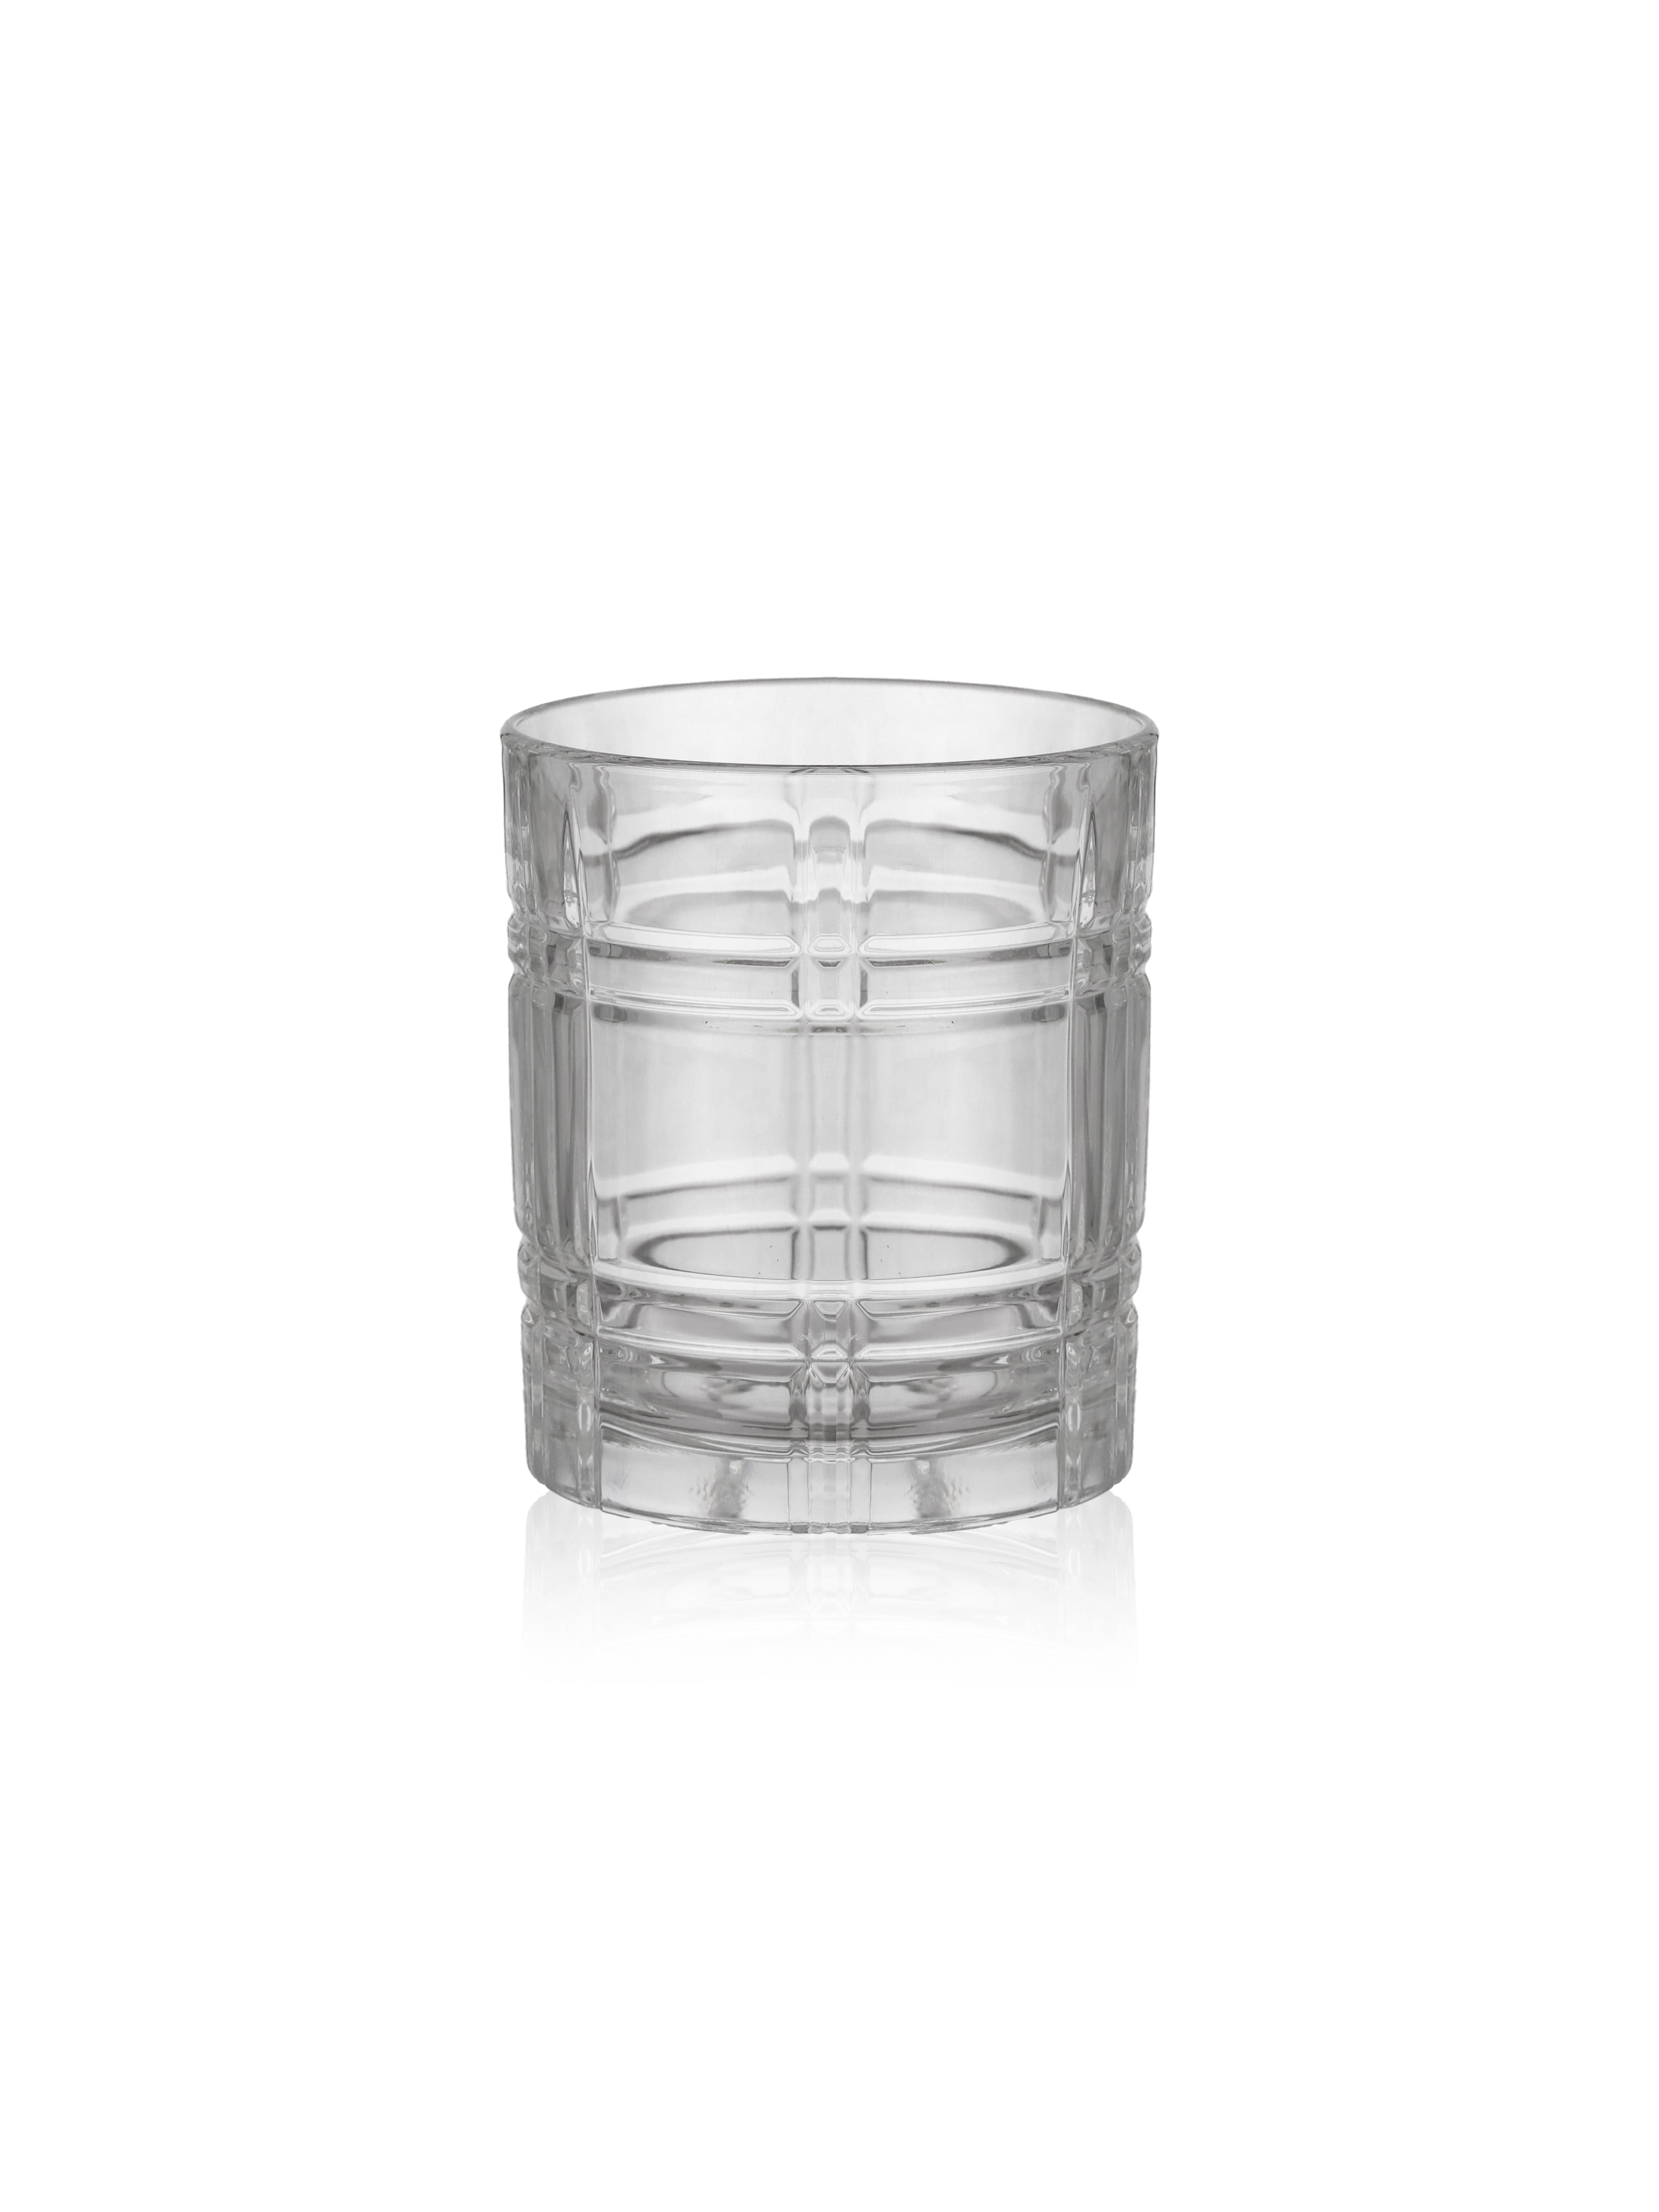 Luxury Crystal Old Fashioned Whisky Glass, Set of 6